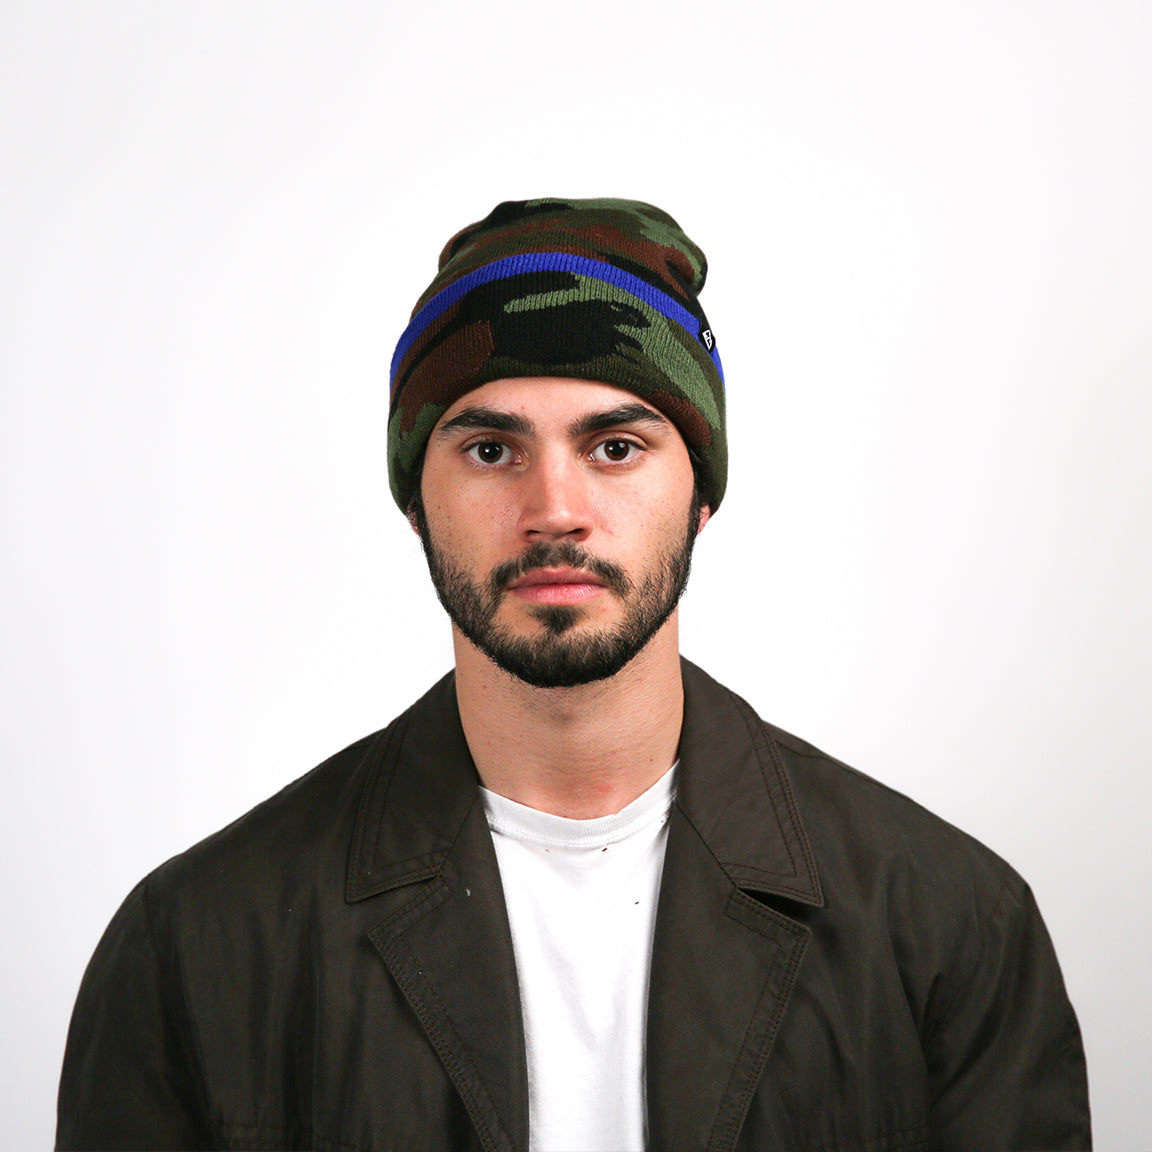 A knitted beanie with a camouflage pattern in dark green, navy blue, and brown, accented with a bright blue stripe. A small black triangular logo is stitched near the brim. The beanie is fitted snugly on the head with a bit of extra room at the top, suggesting a slightly slouchy style.